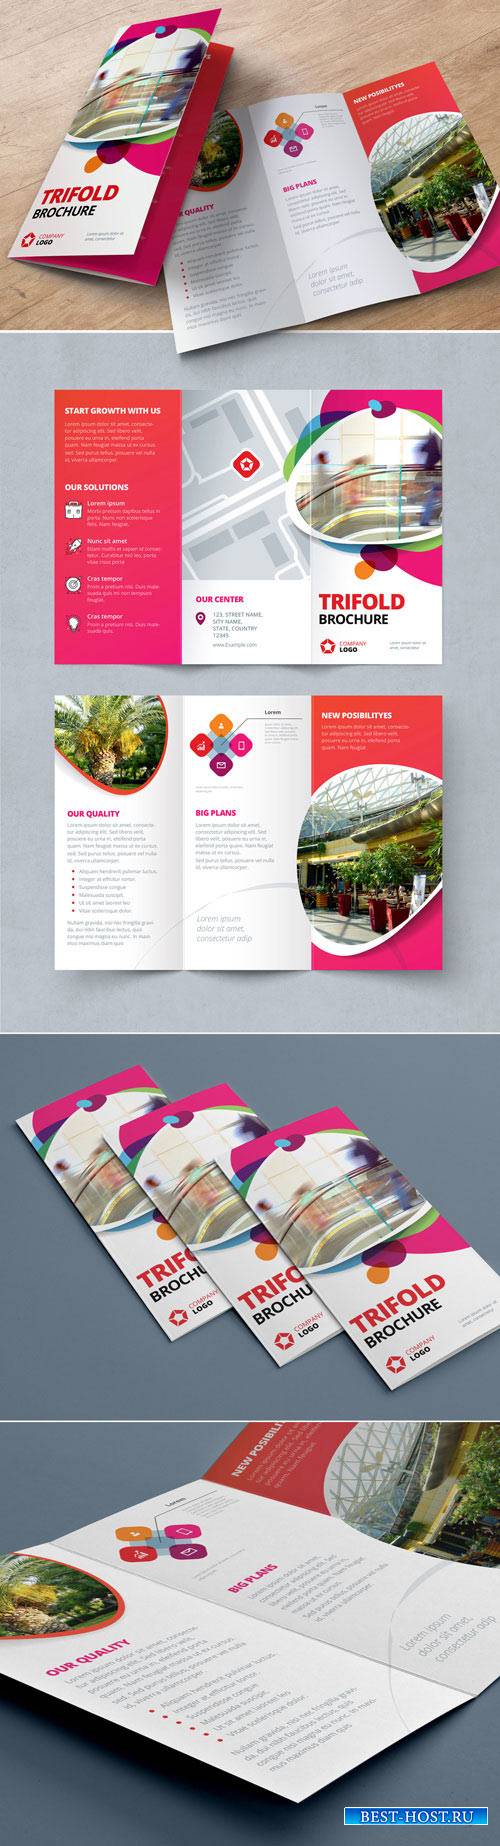 Pink and Red Gradient Trifold Brochure Layout with Abstract Spots 212820437